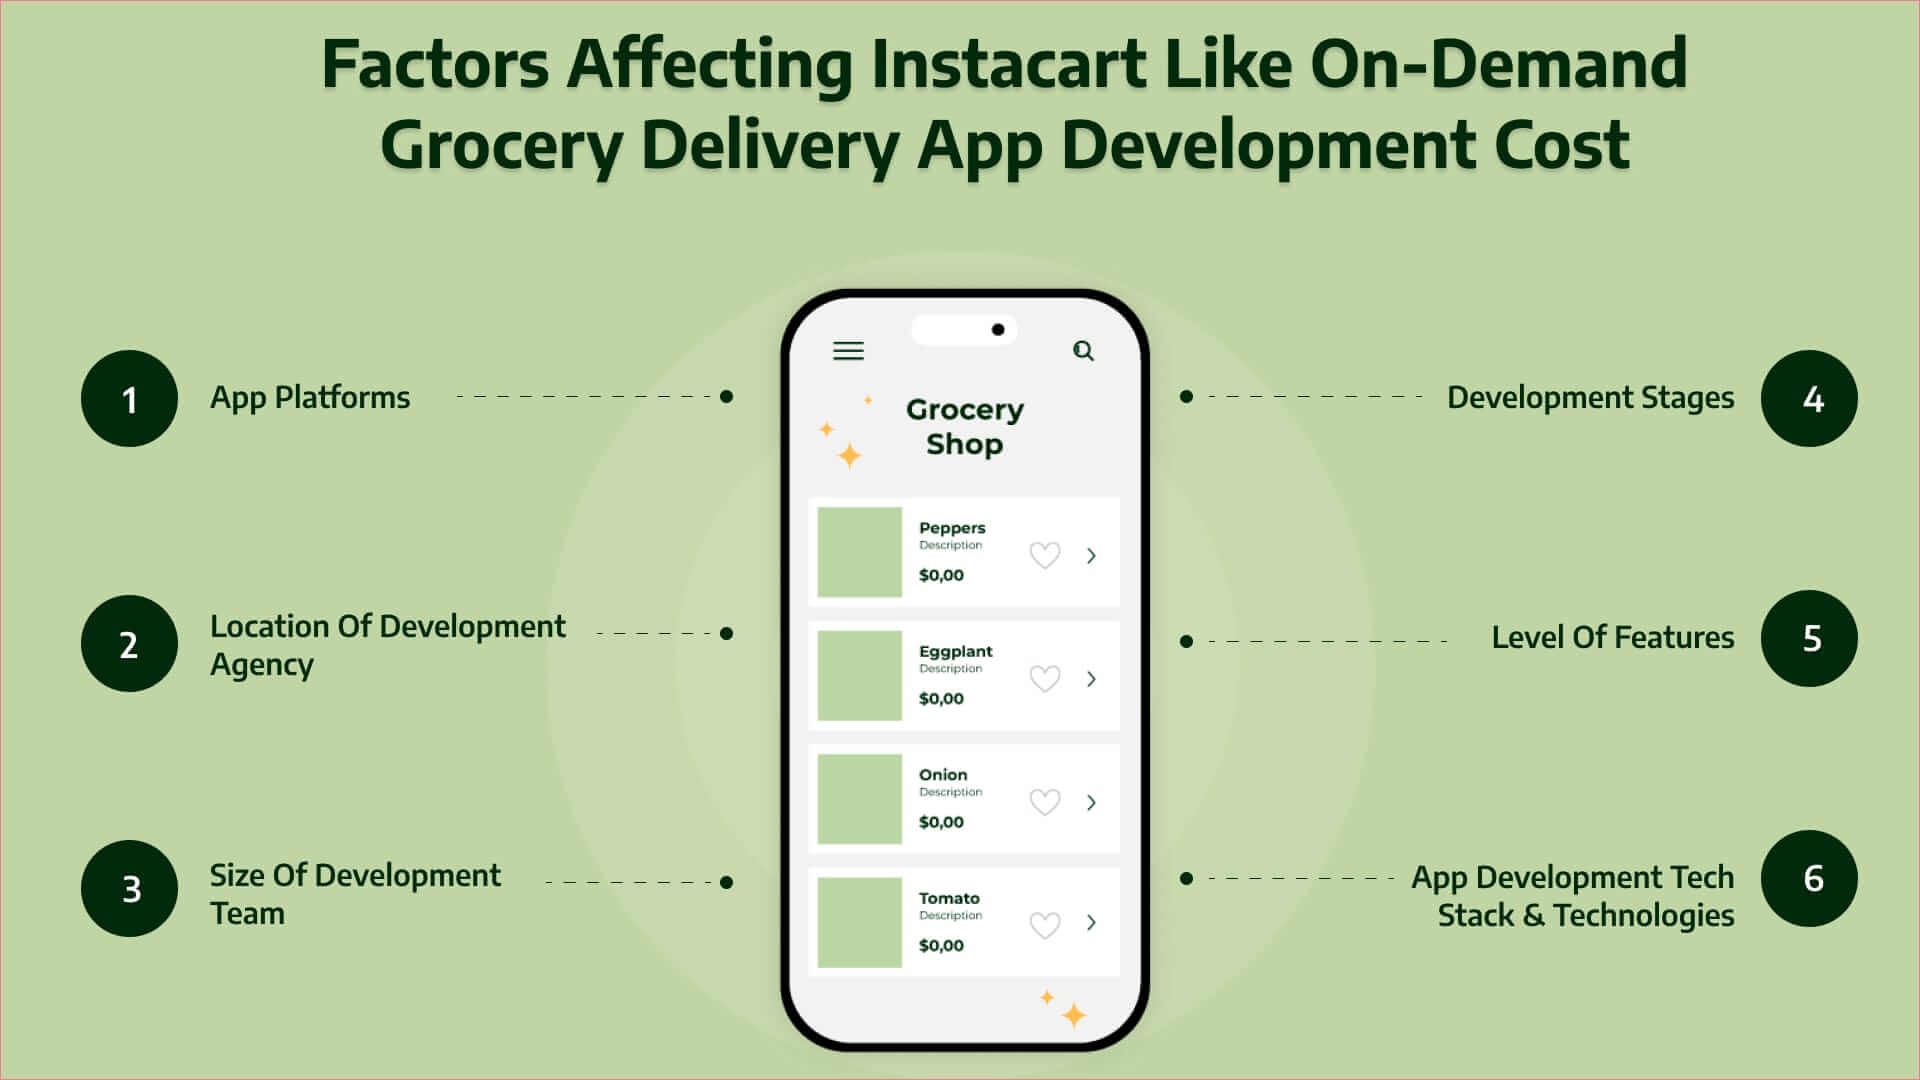 Factors That Can Impact The Grocery App Development Cost